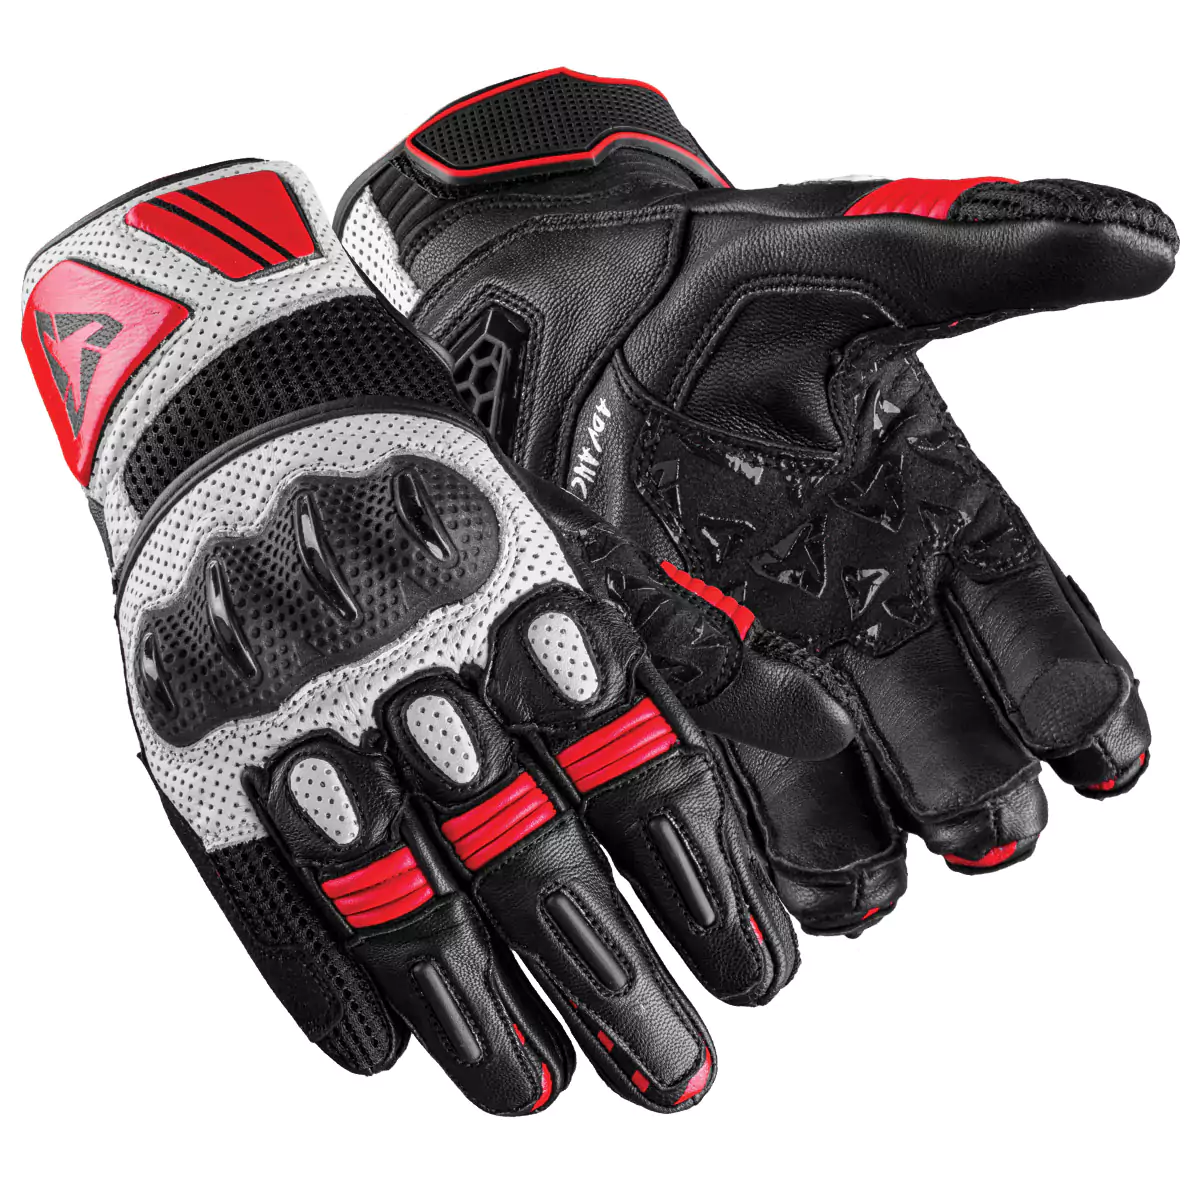 Pair of lightweight and breathable summer race motorcycle gloves designed for comfort and grip.